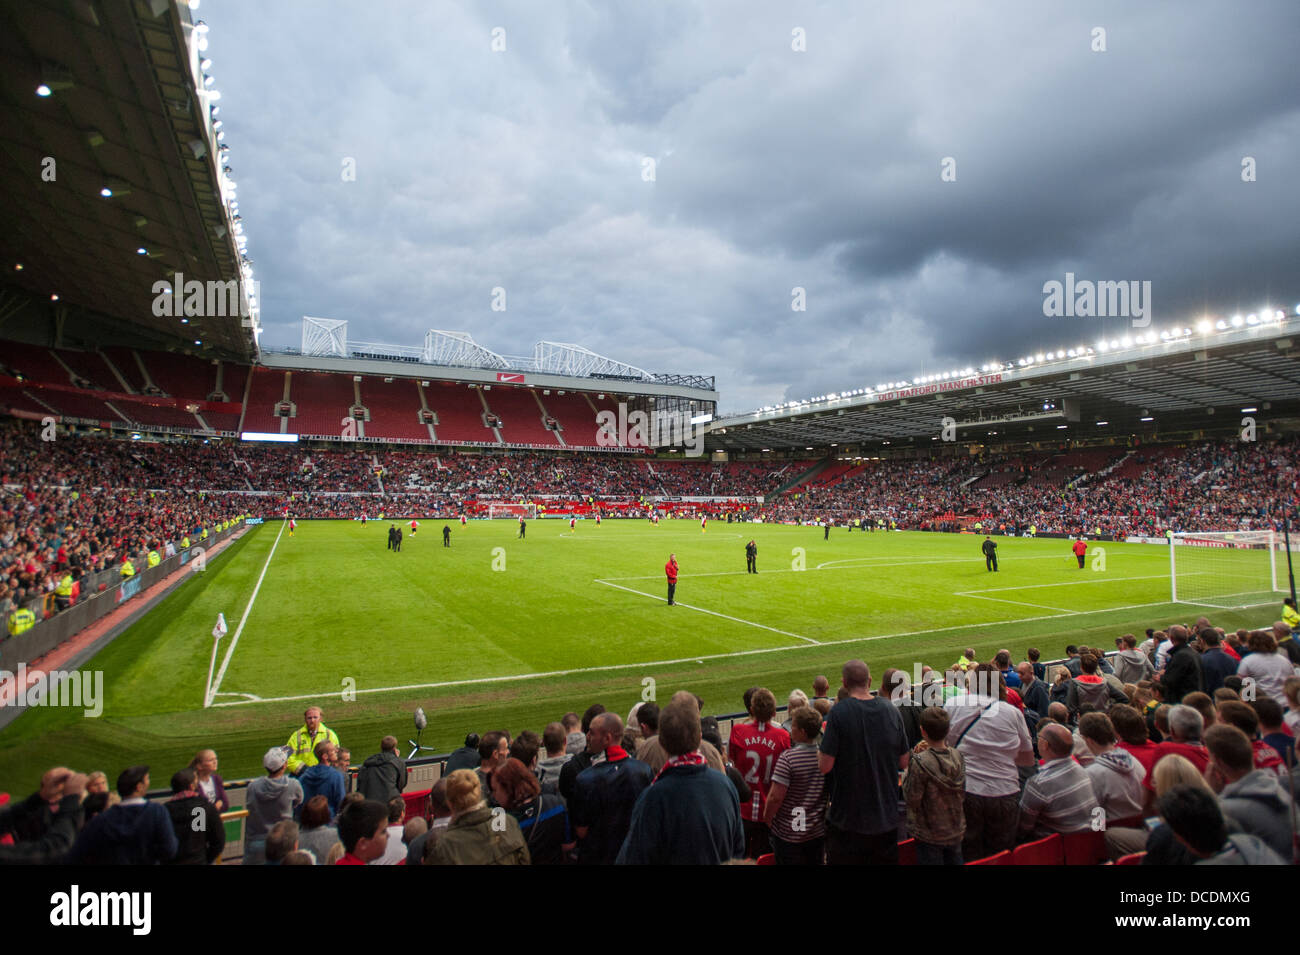 Old Trafford. Manchester United Football Club. Stock Photo